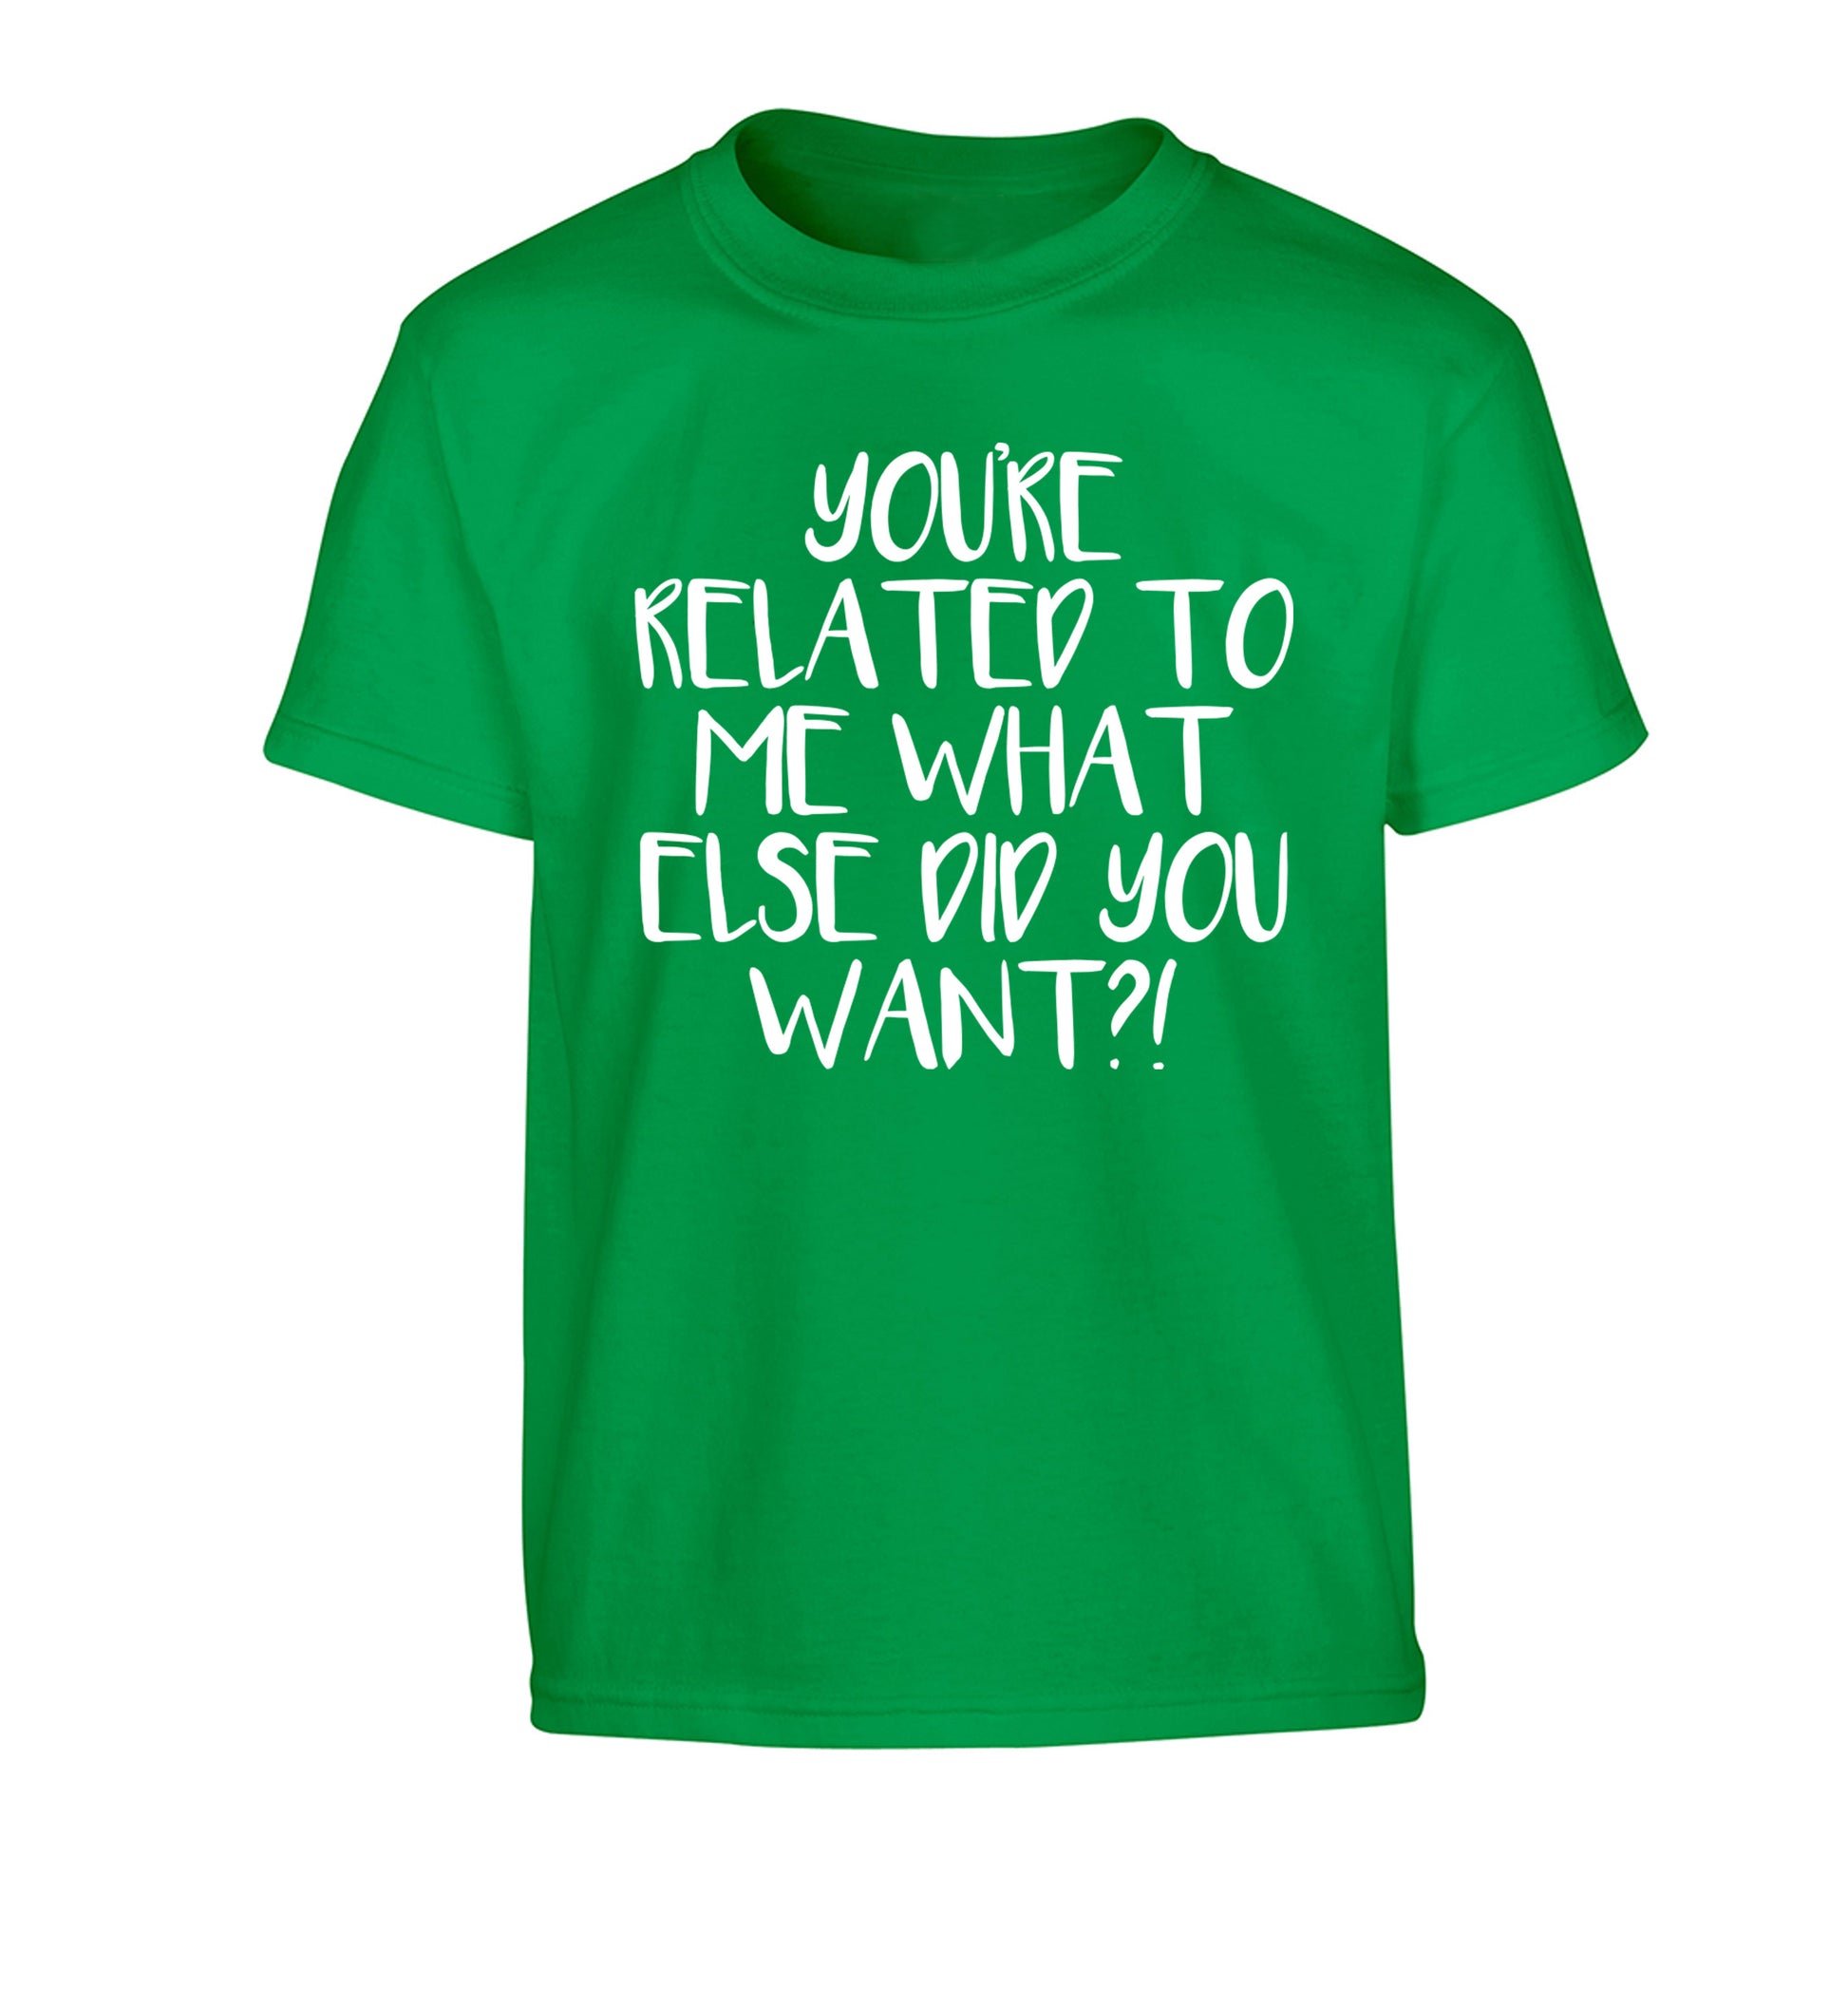 You're related to me what more do you want? Children's green Tshirt 12-13 Years